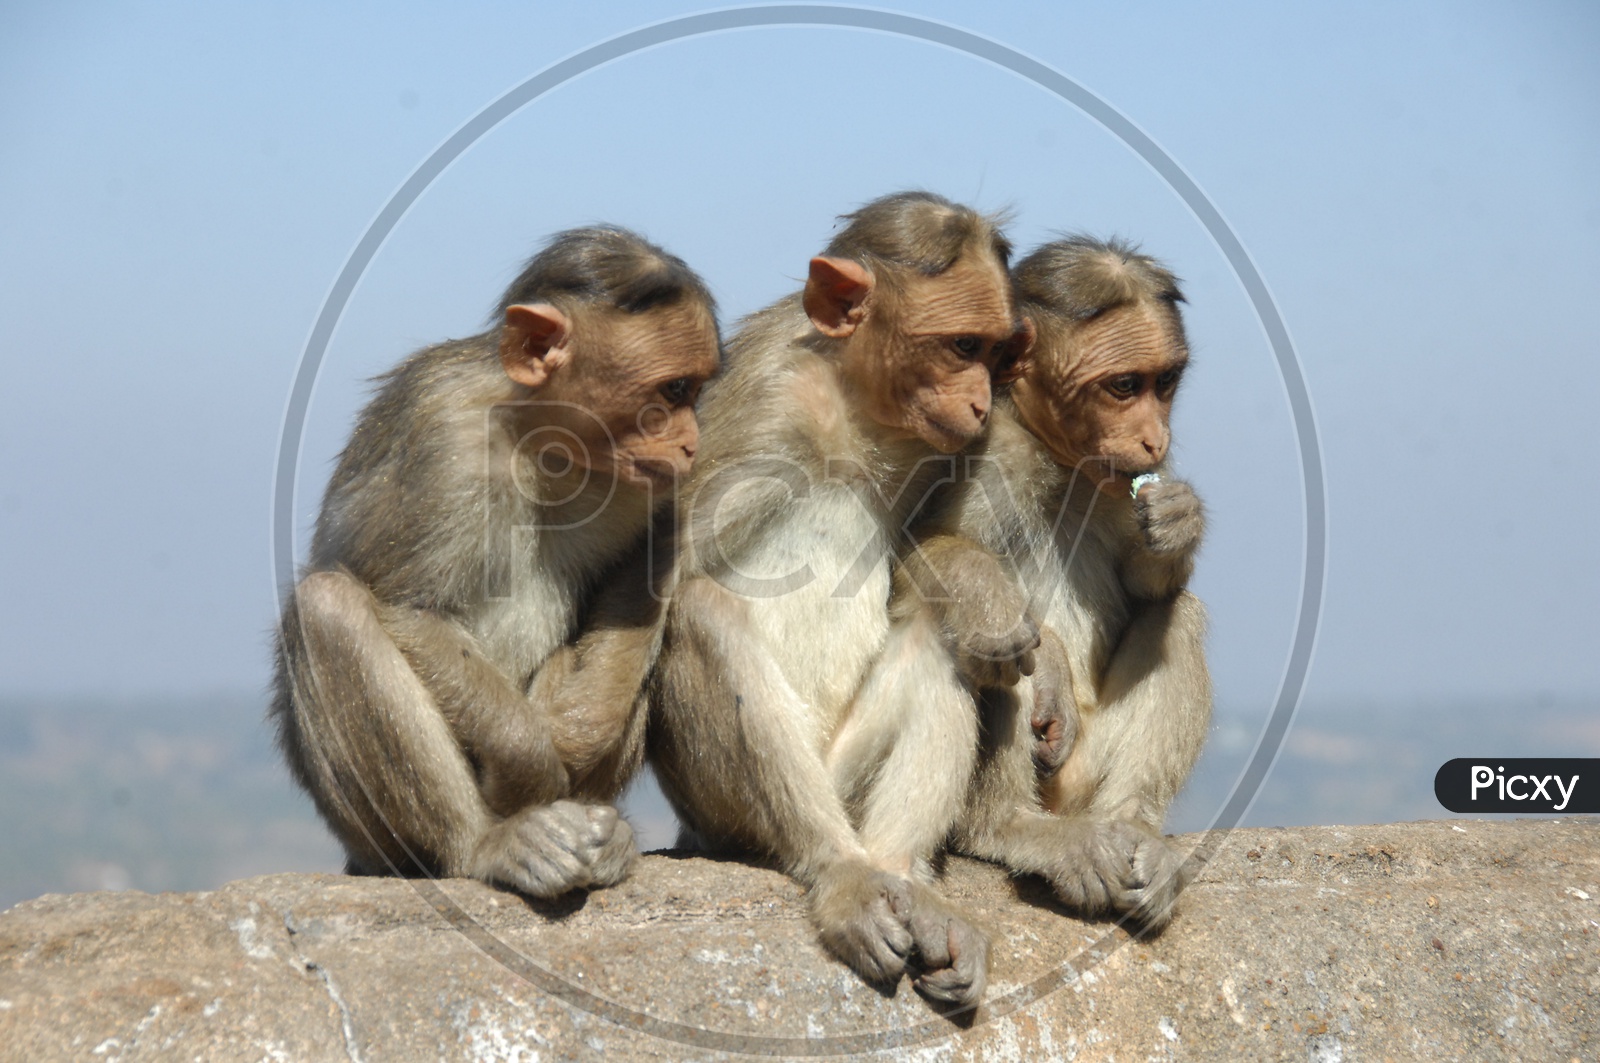 Macaques  Or Monkeys  Sitting on a wall